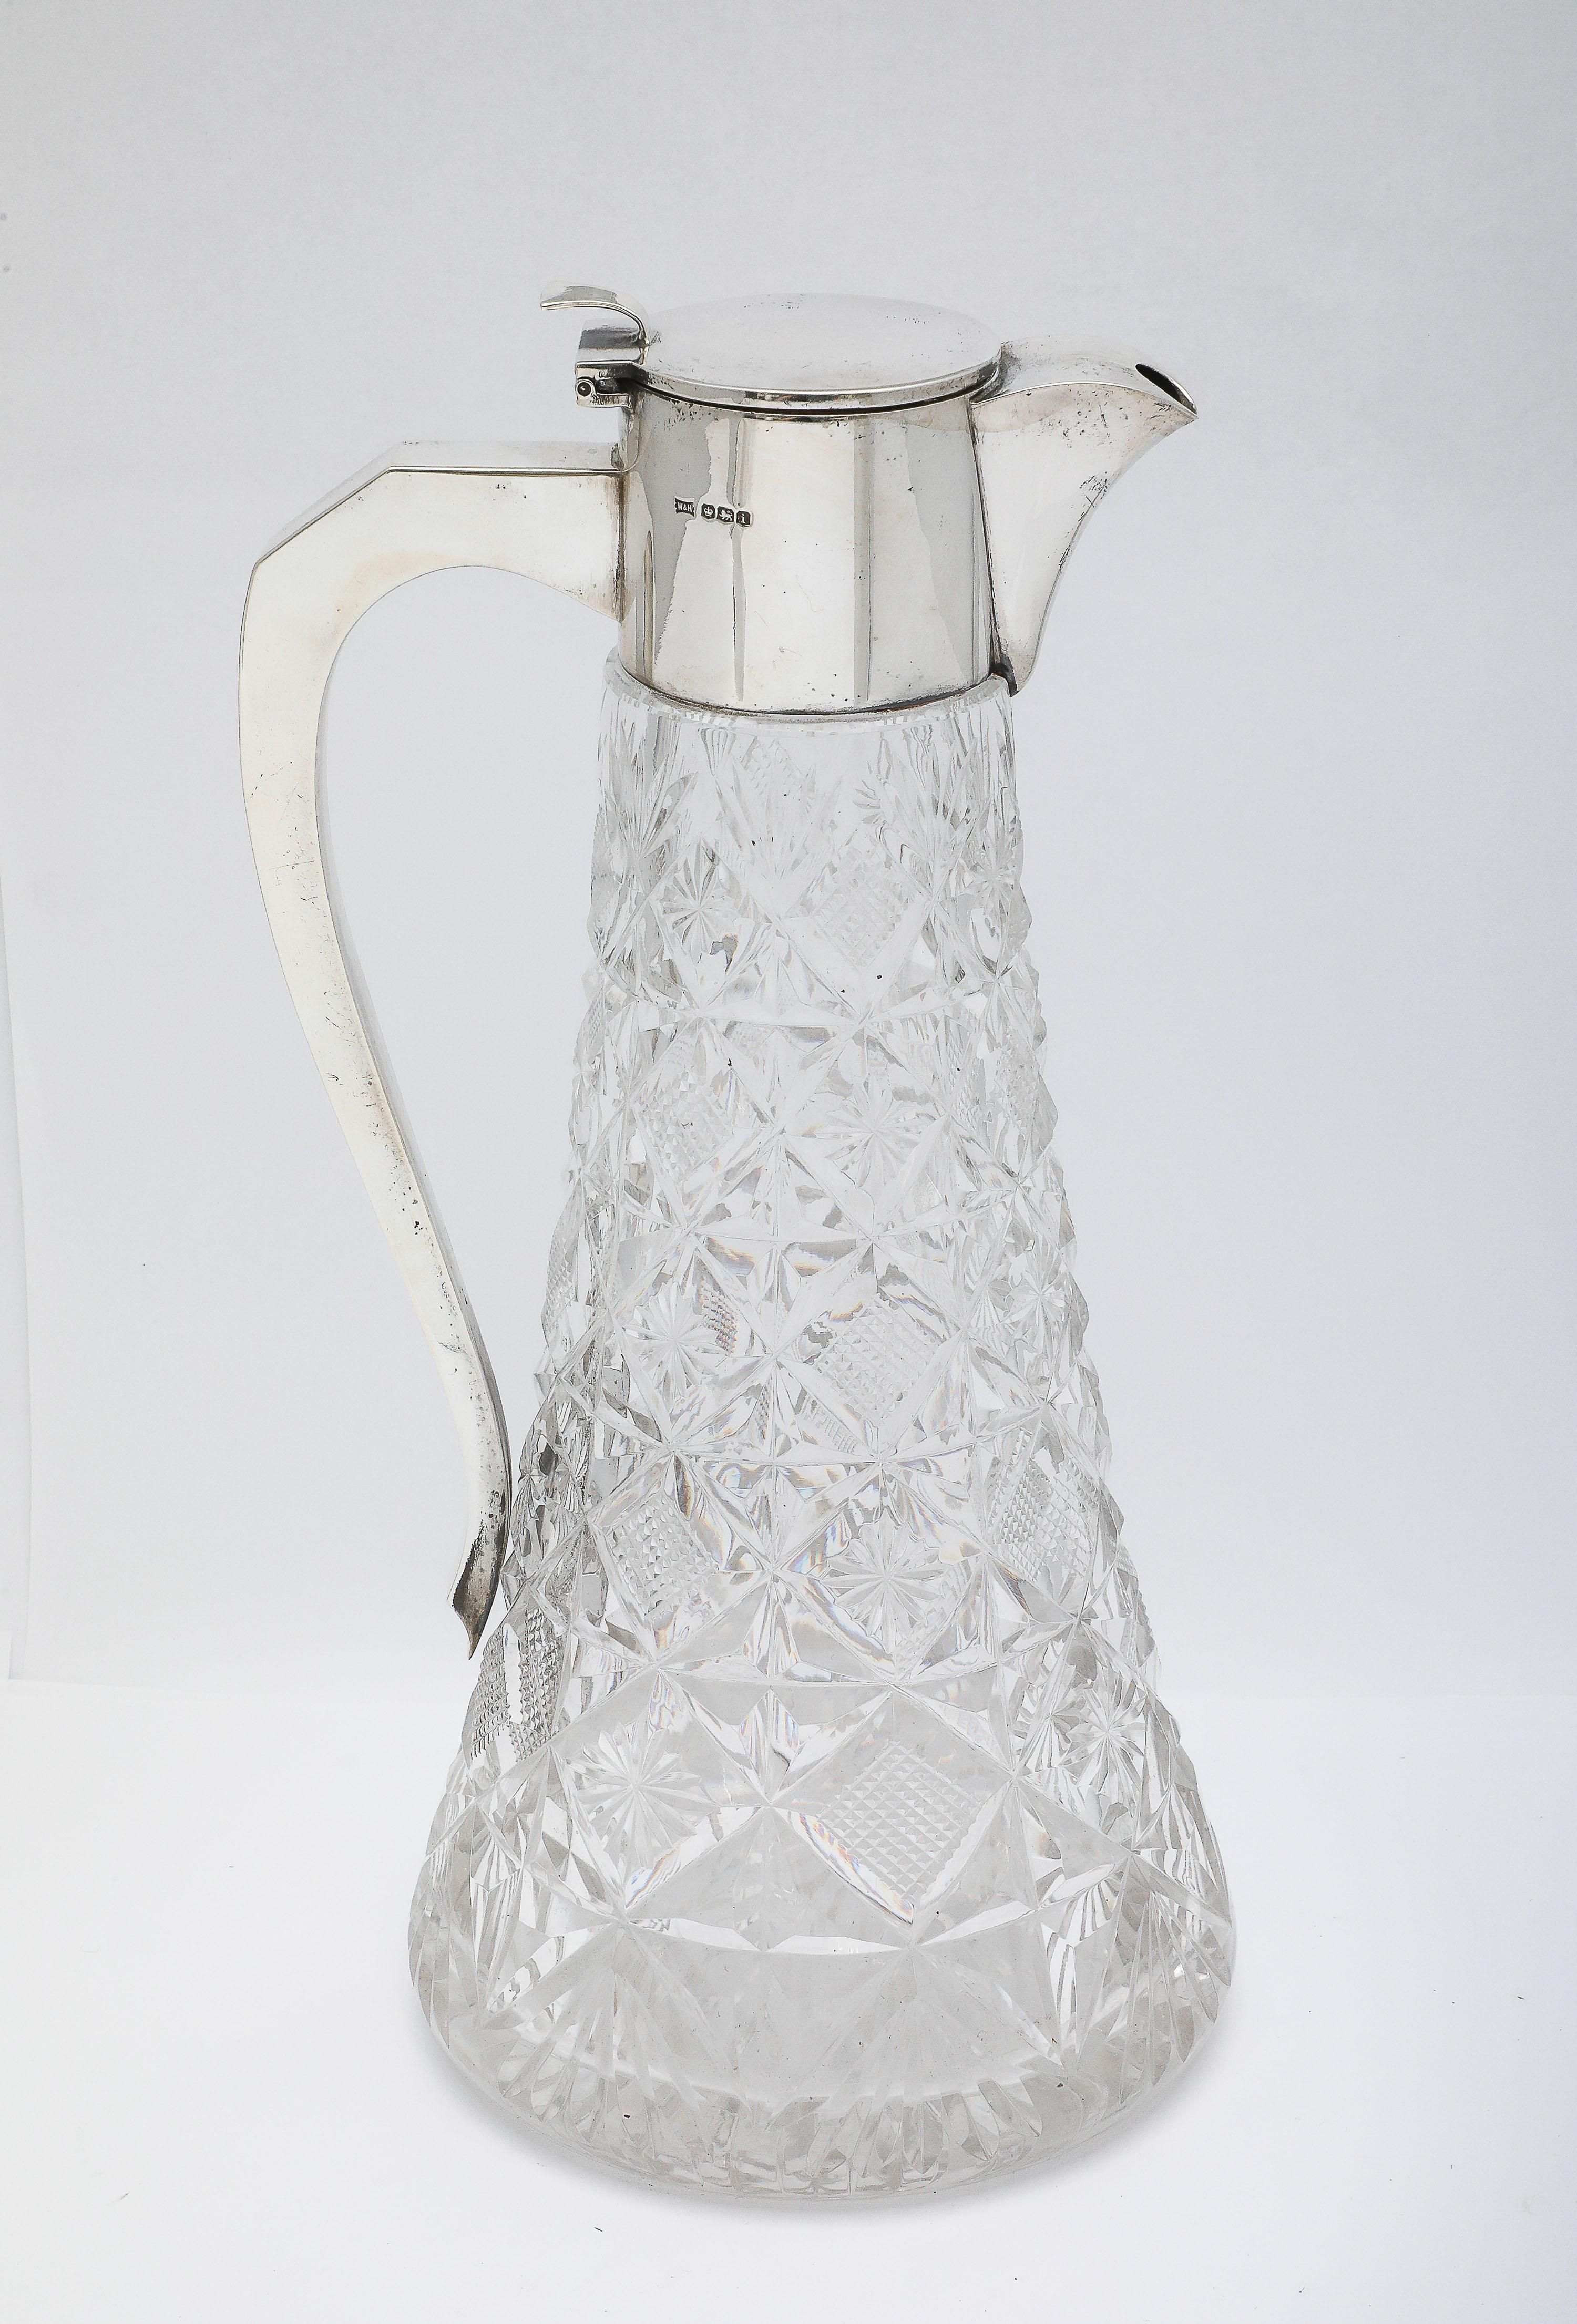 Large Edwardian Period Sterling Silver-Mounted Claret Jug For Sale 4